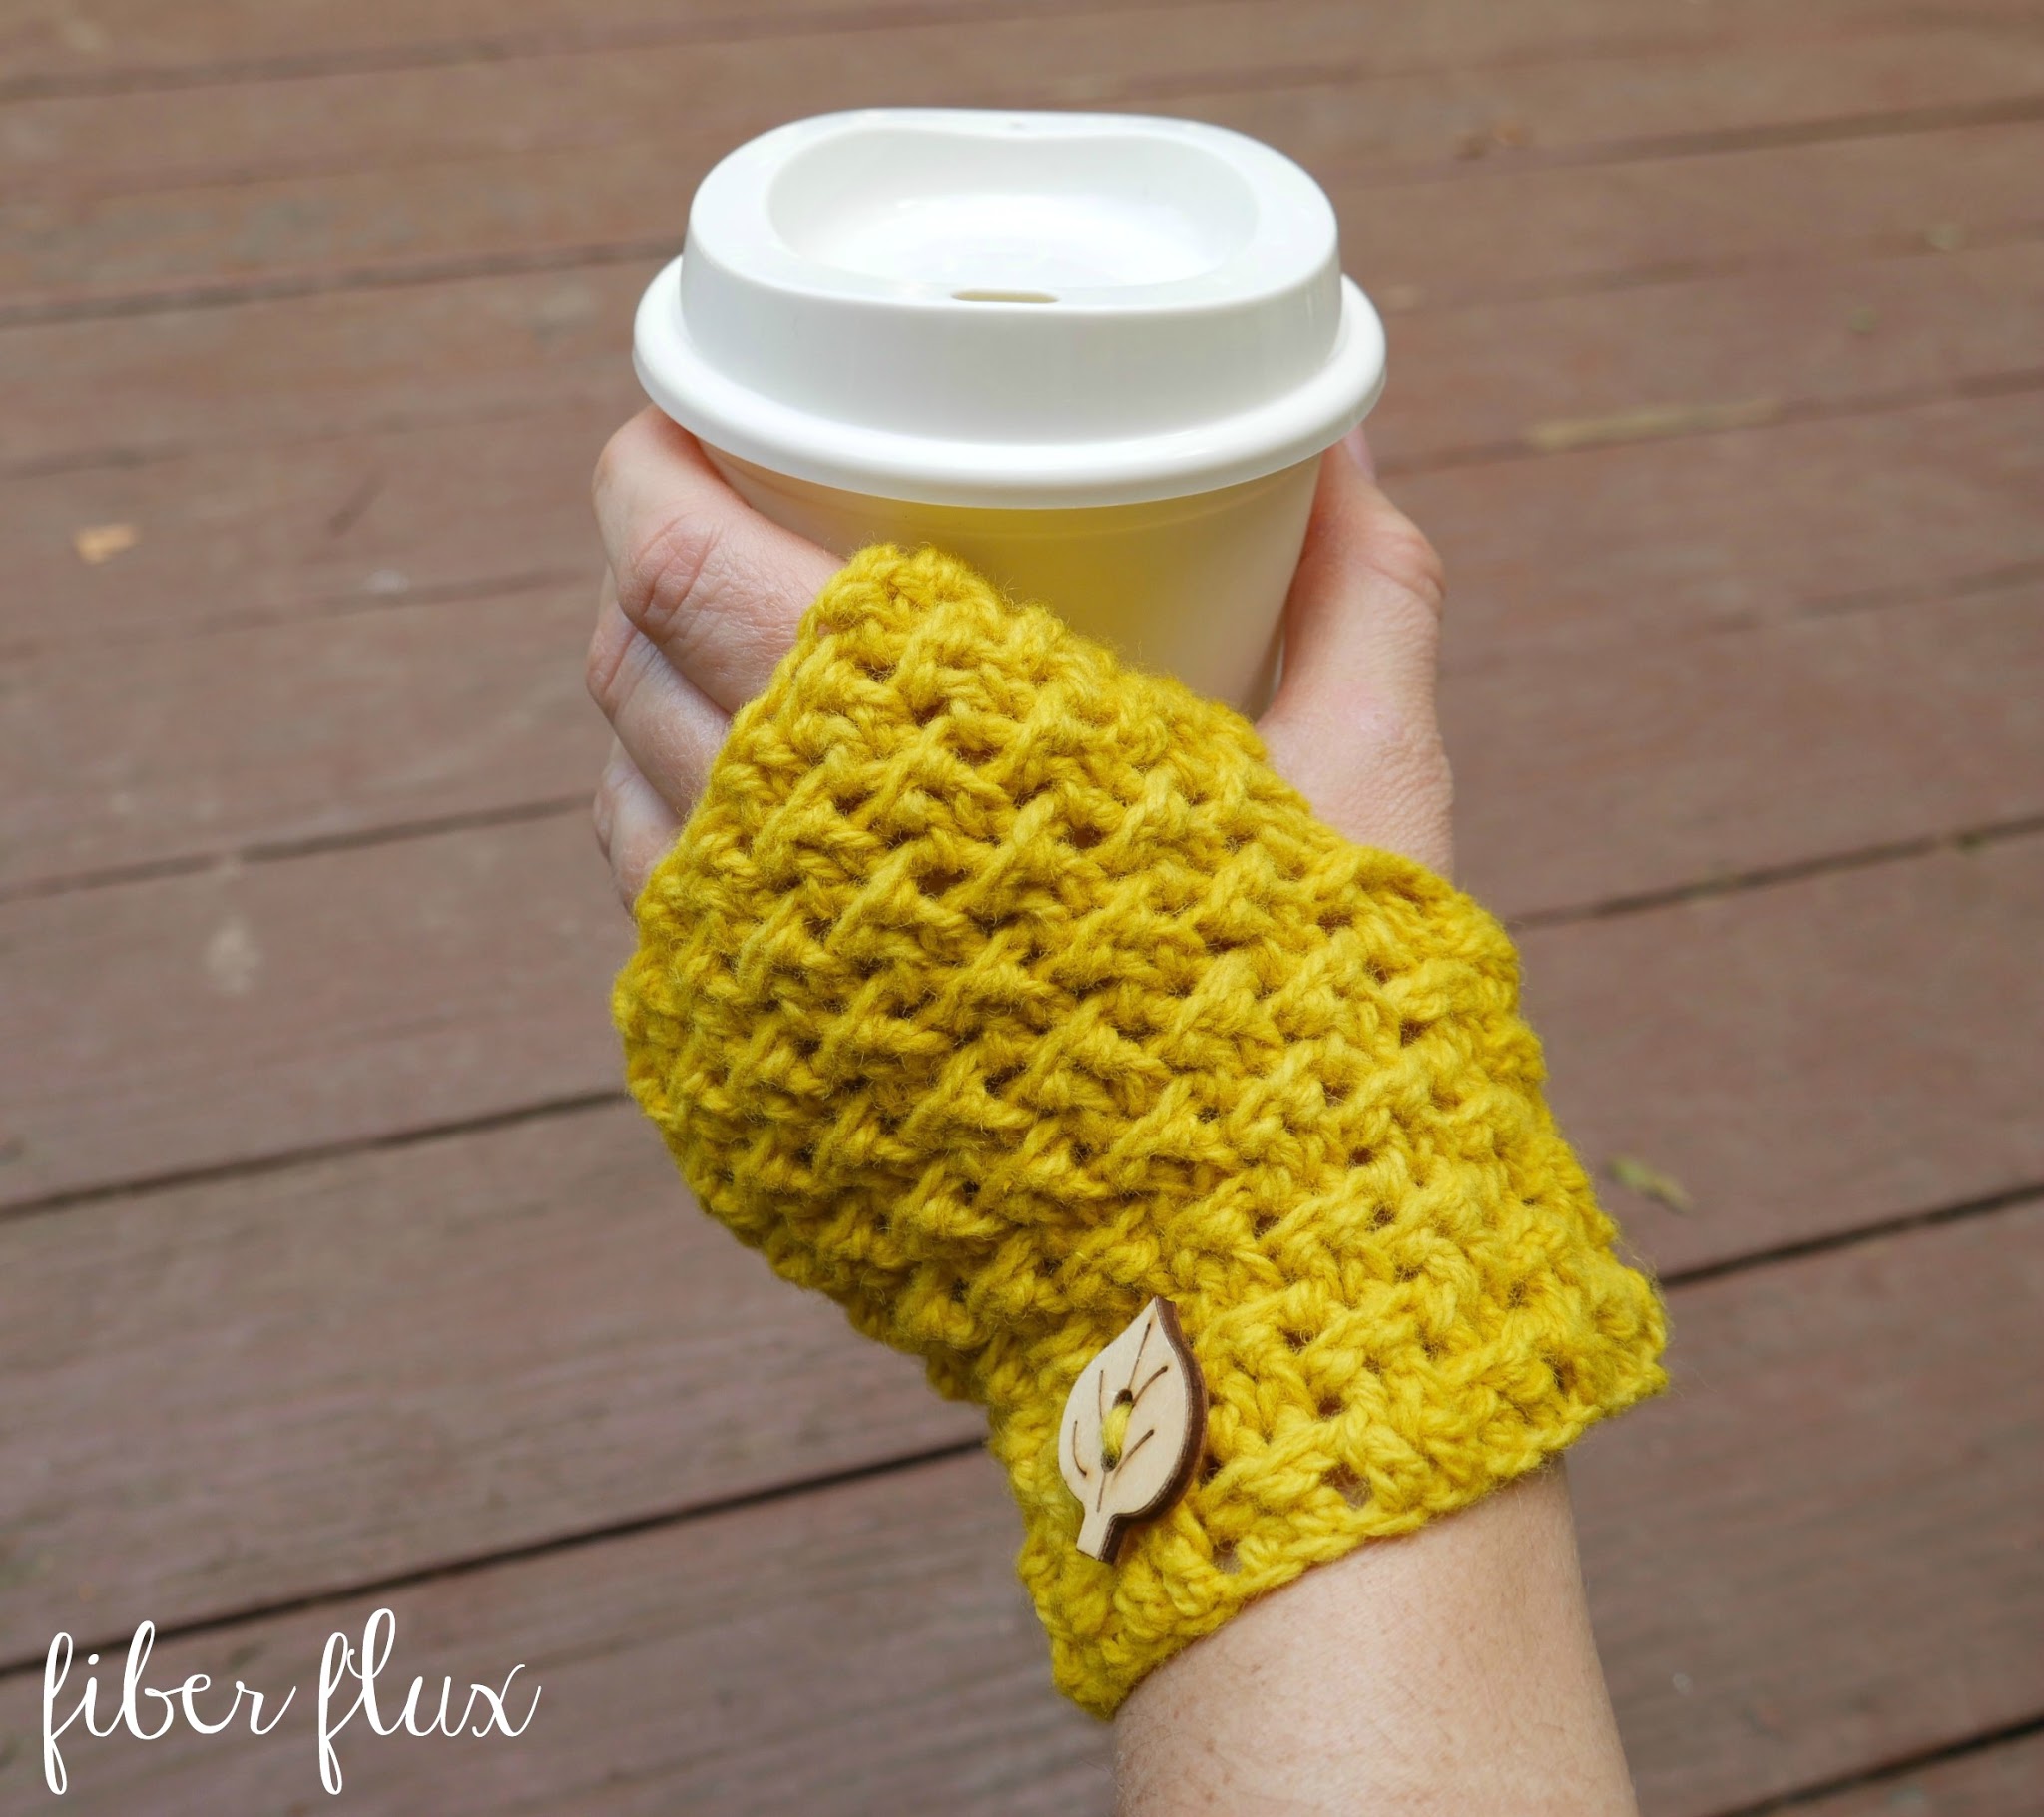 Autumn Glow crochet fingerless mitts shown holding a cup